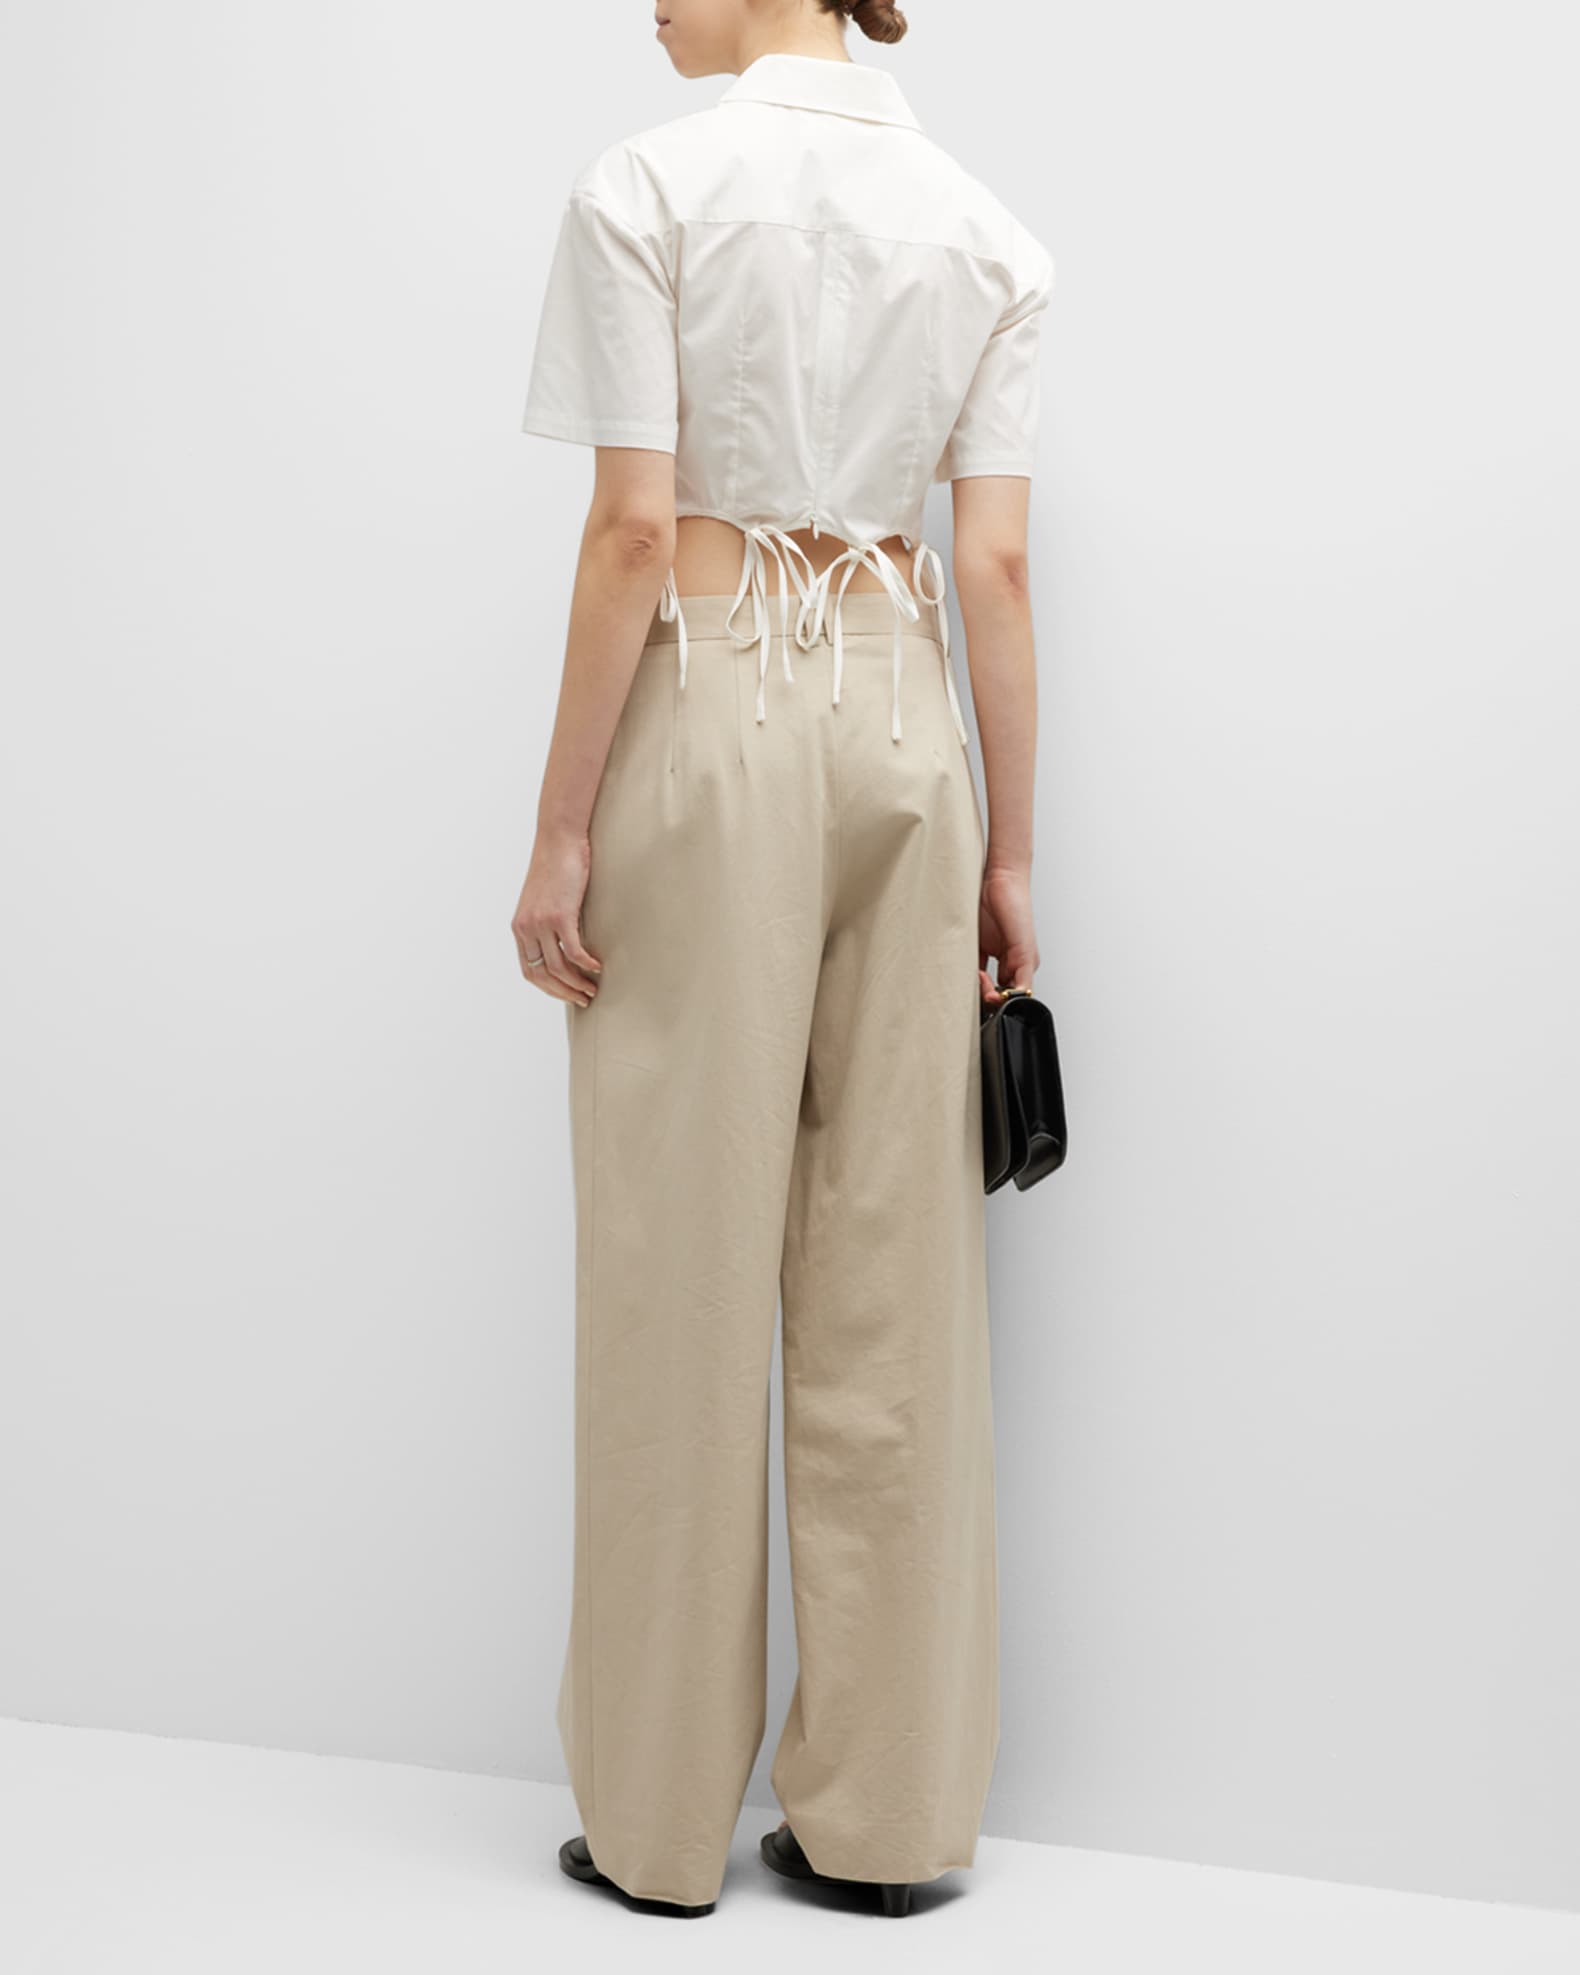 Anna Quan Cecil Cropped Tassel Suiting Top | Neiman Marcus